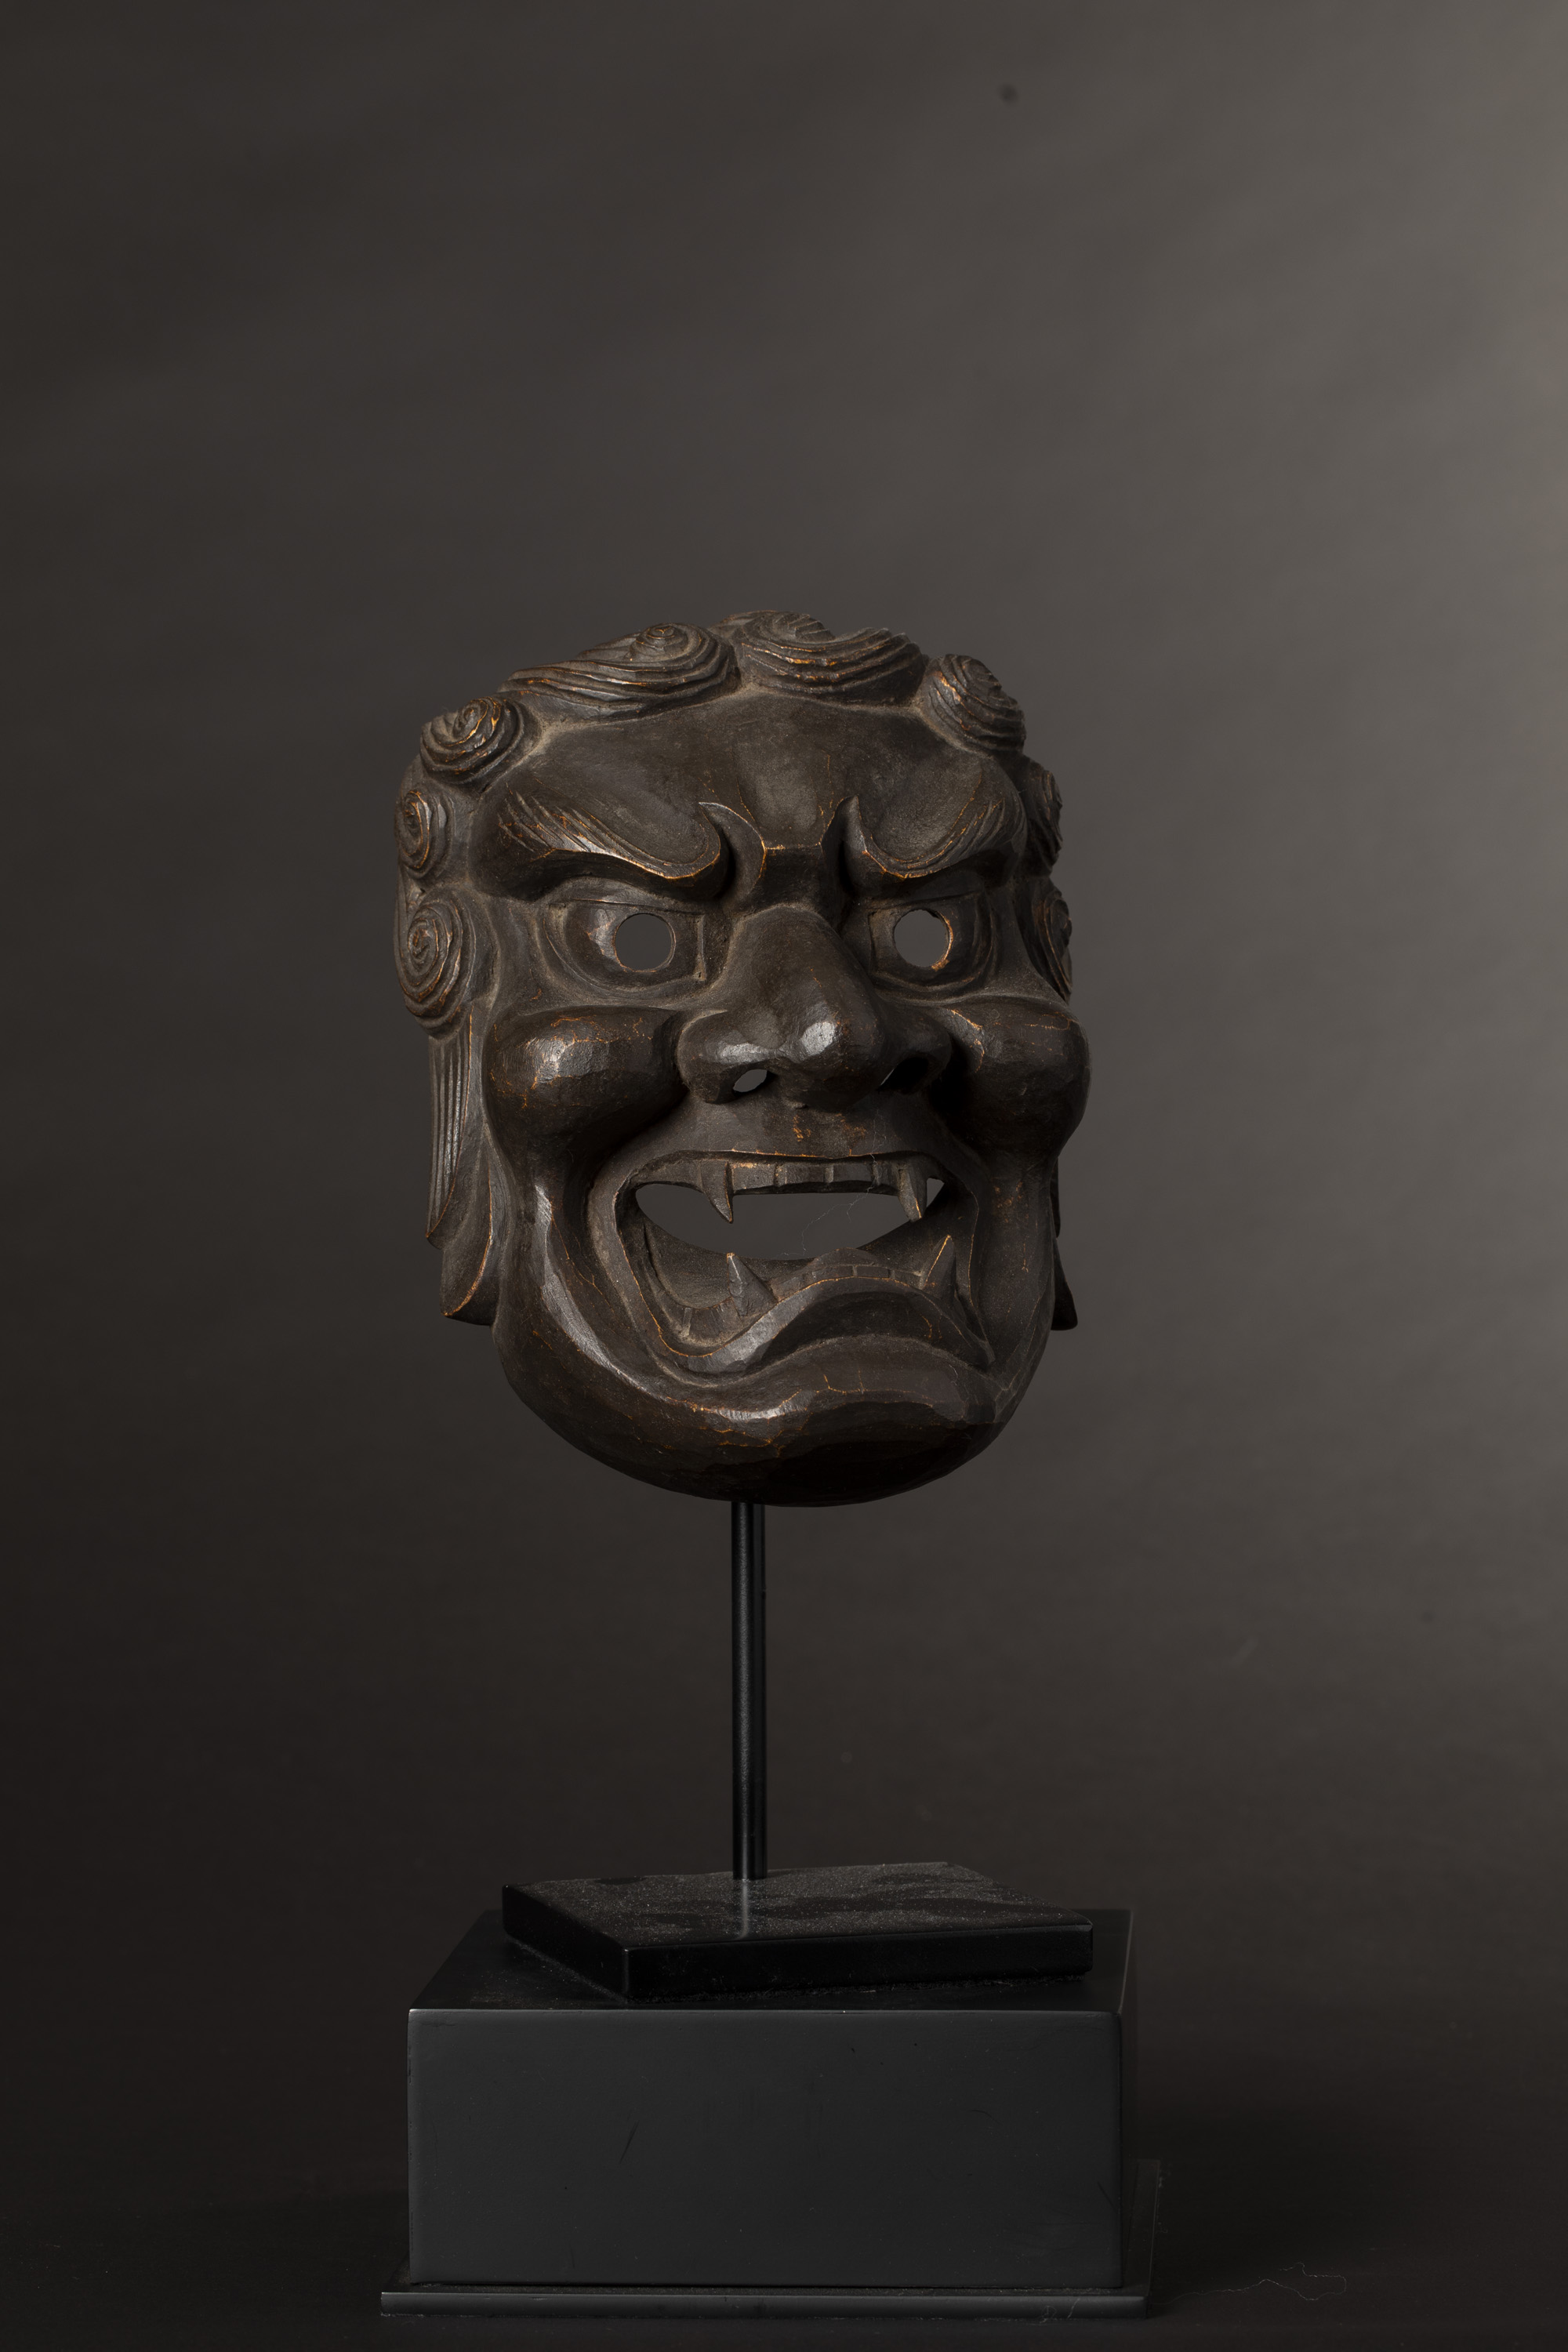 Japanese Hannya Mask use in Noh Theatre Performances